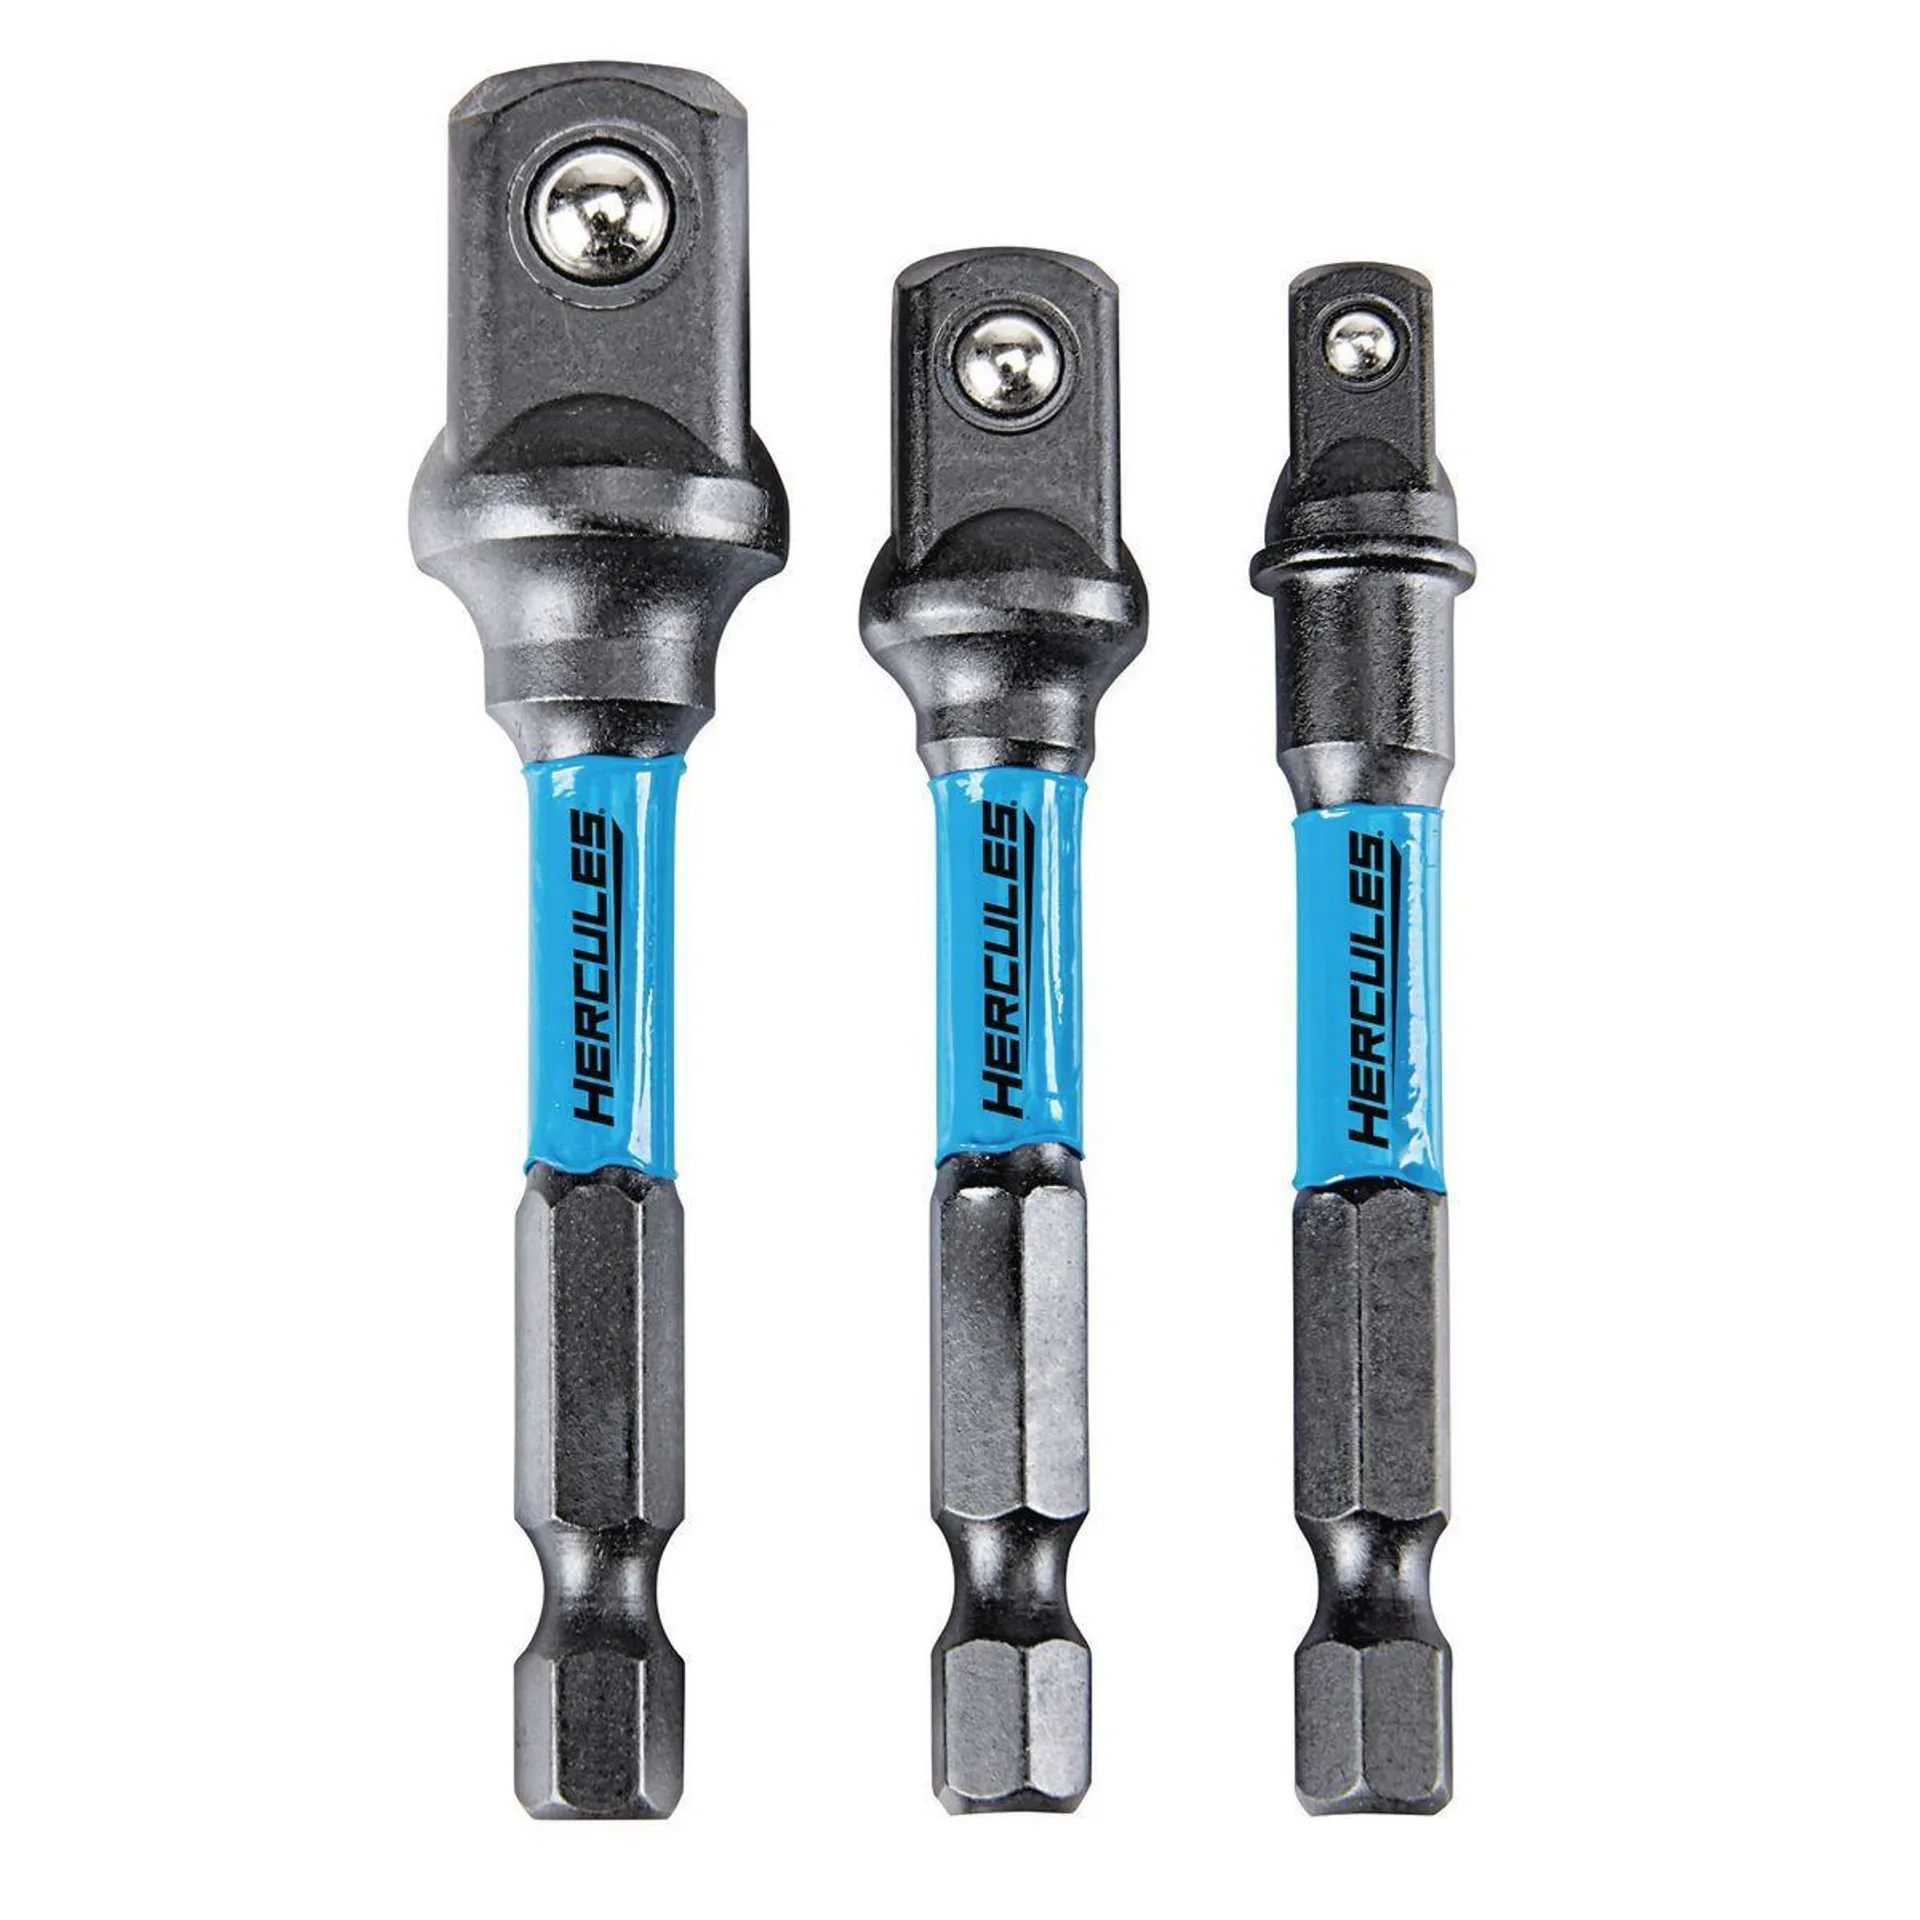 Impact Rated Hex Shank Socket Driver Set, 3 Pack